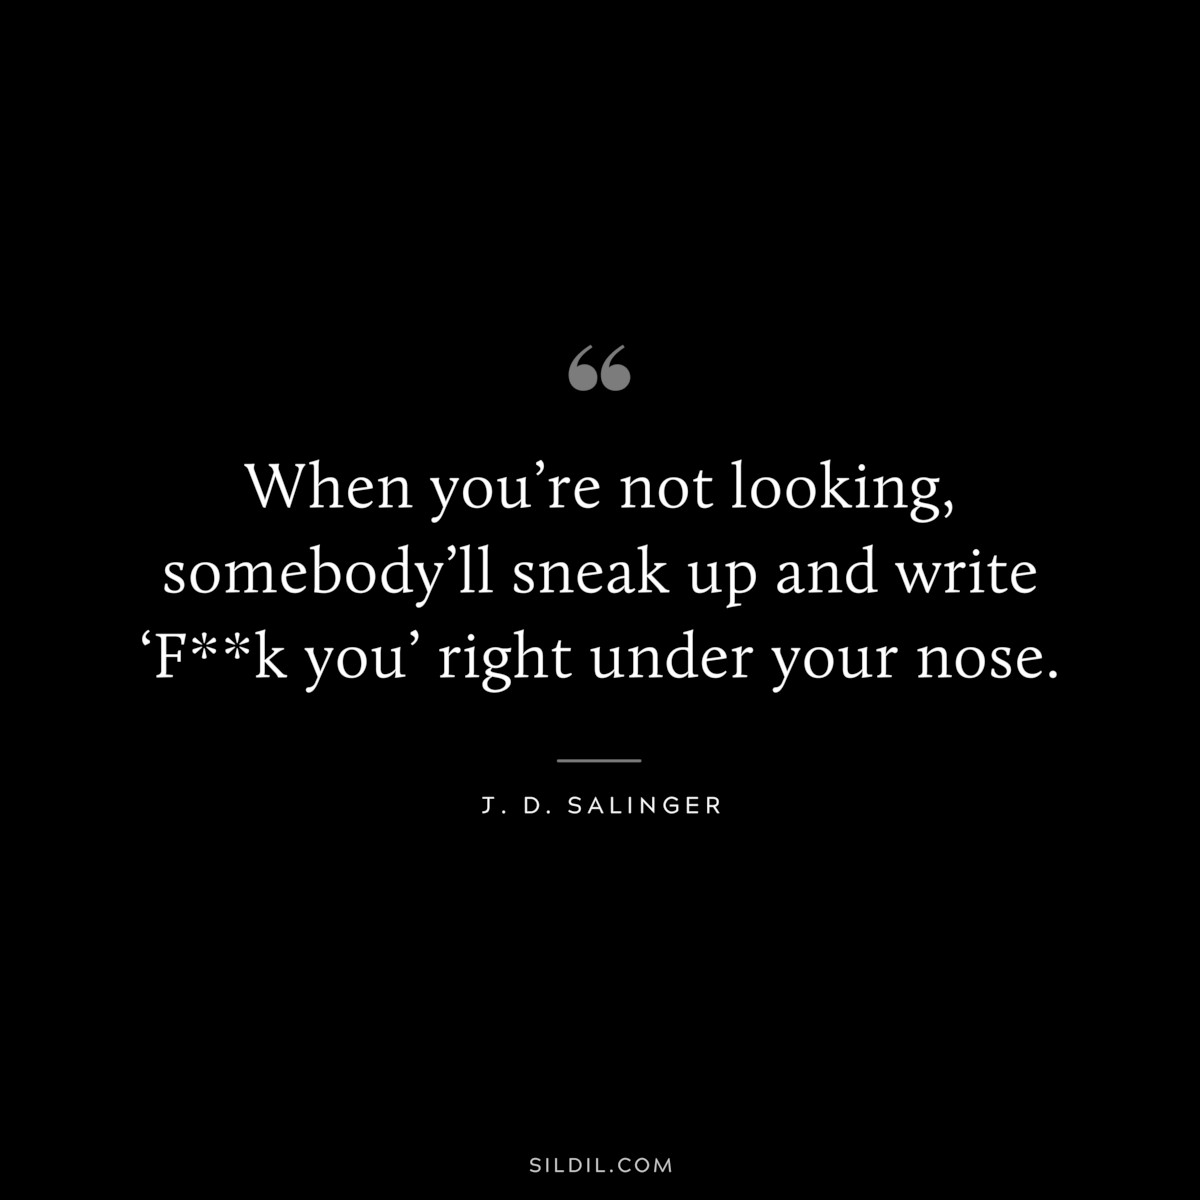 When you’re not looking, somebody’ll sneak up and write ‘F**k you’ right under your nose. — J. D. Salinger